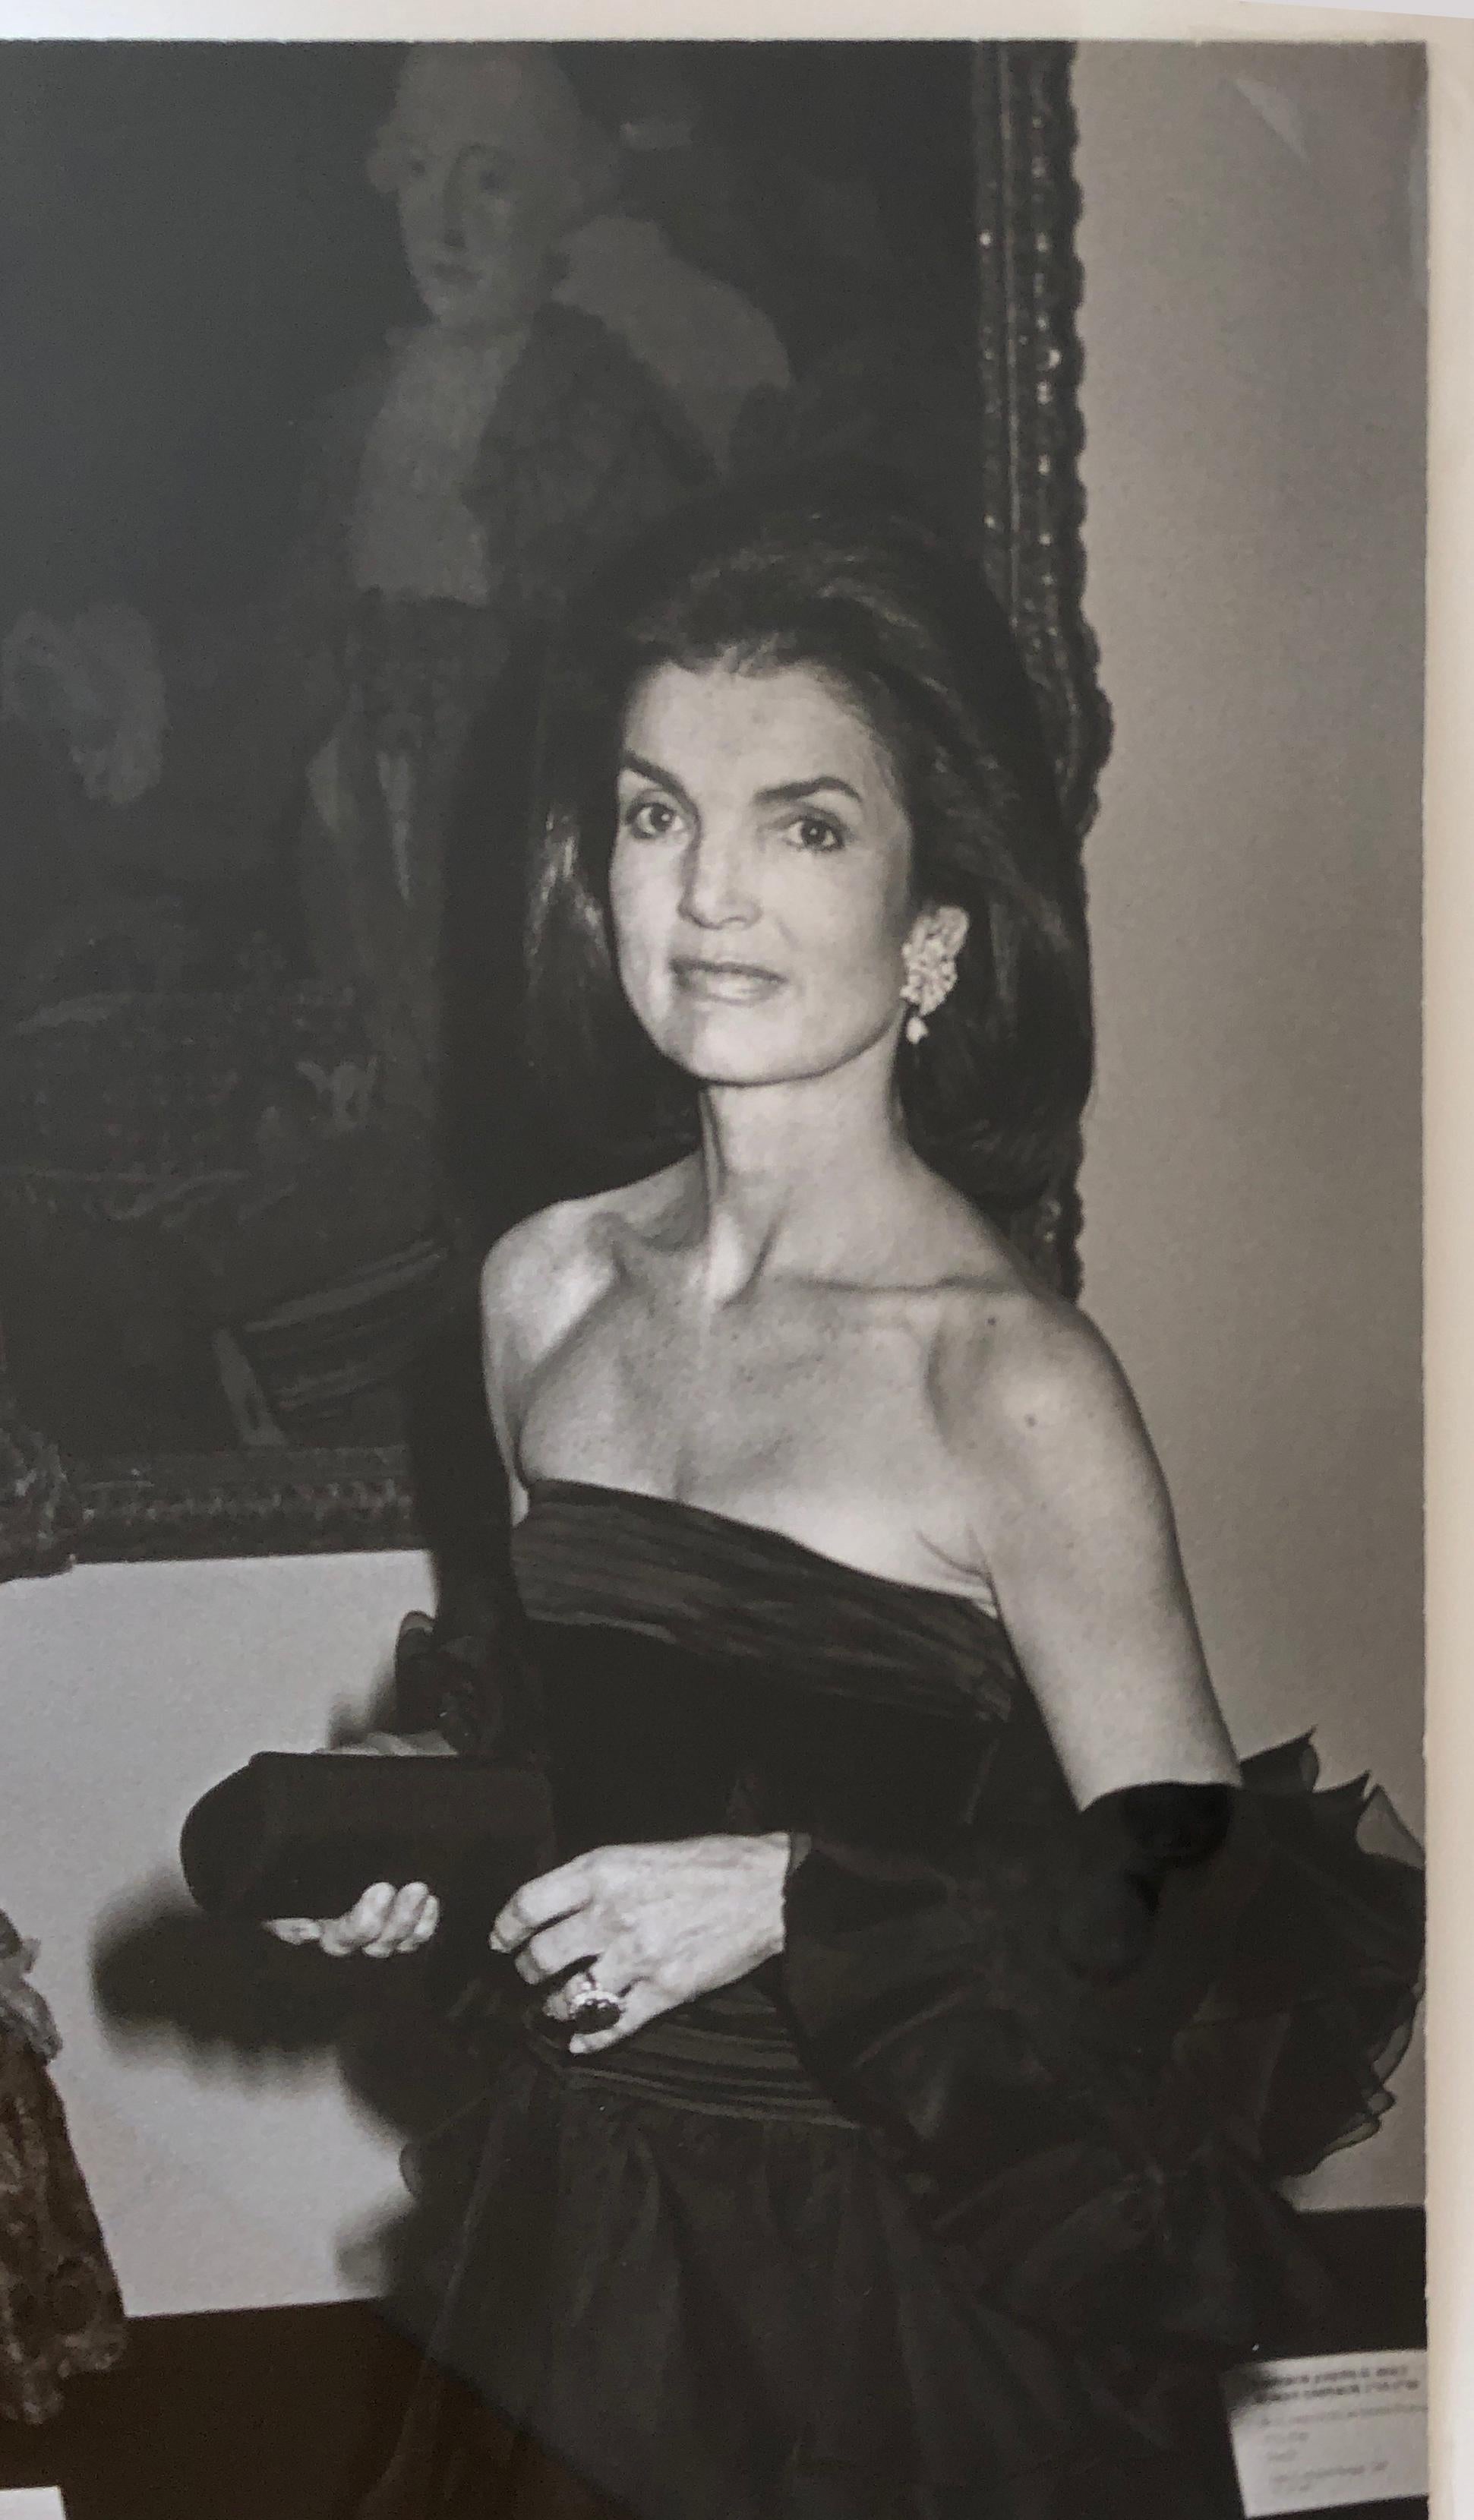 Jacqueline Kennedy Onassis at the Metropolitan Museum of Art 1